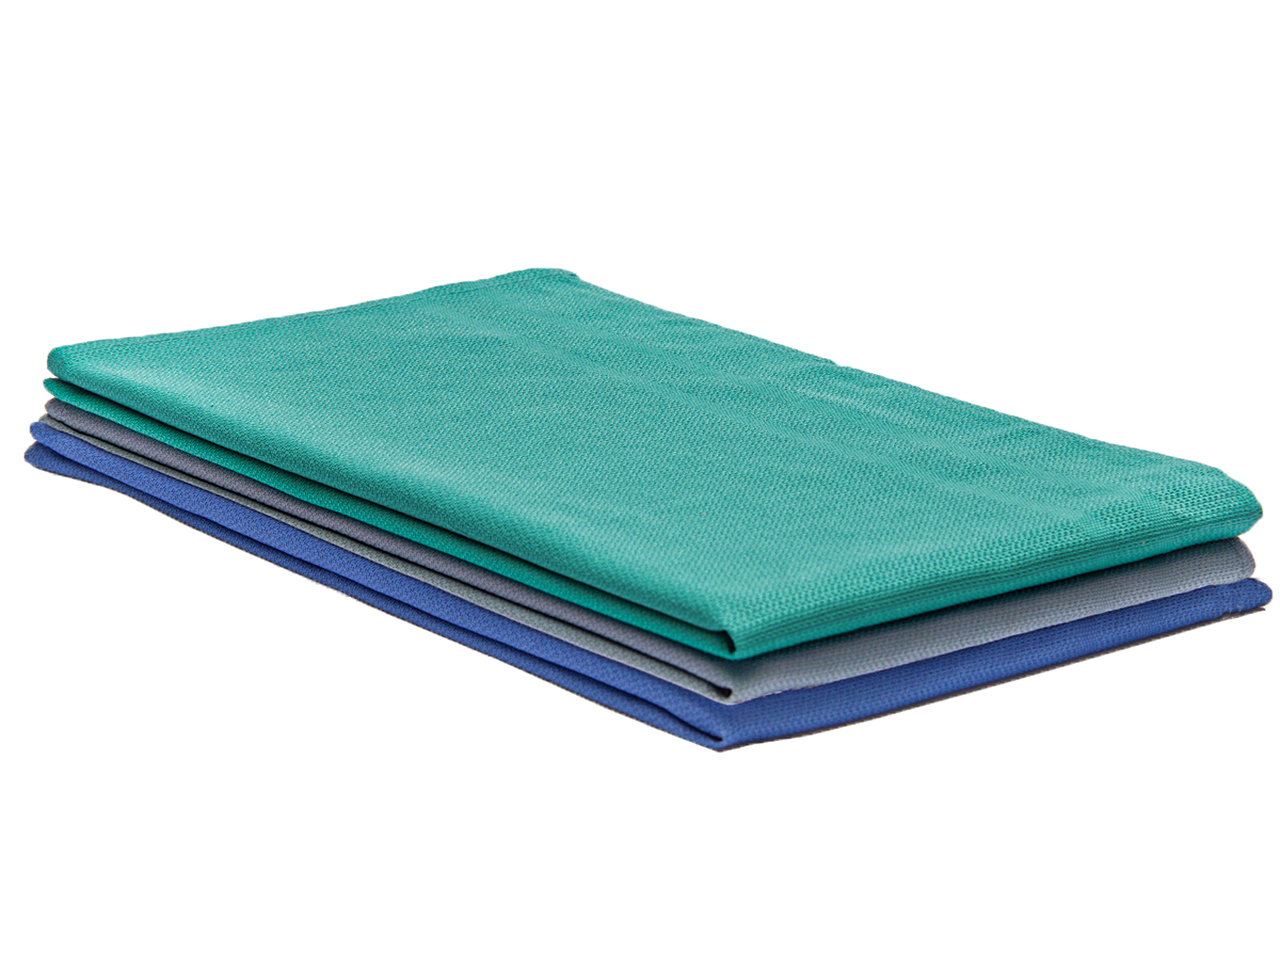 Blue Huck/Surgical Towels - 10 lbs Box